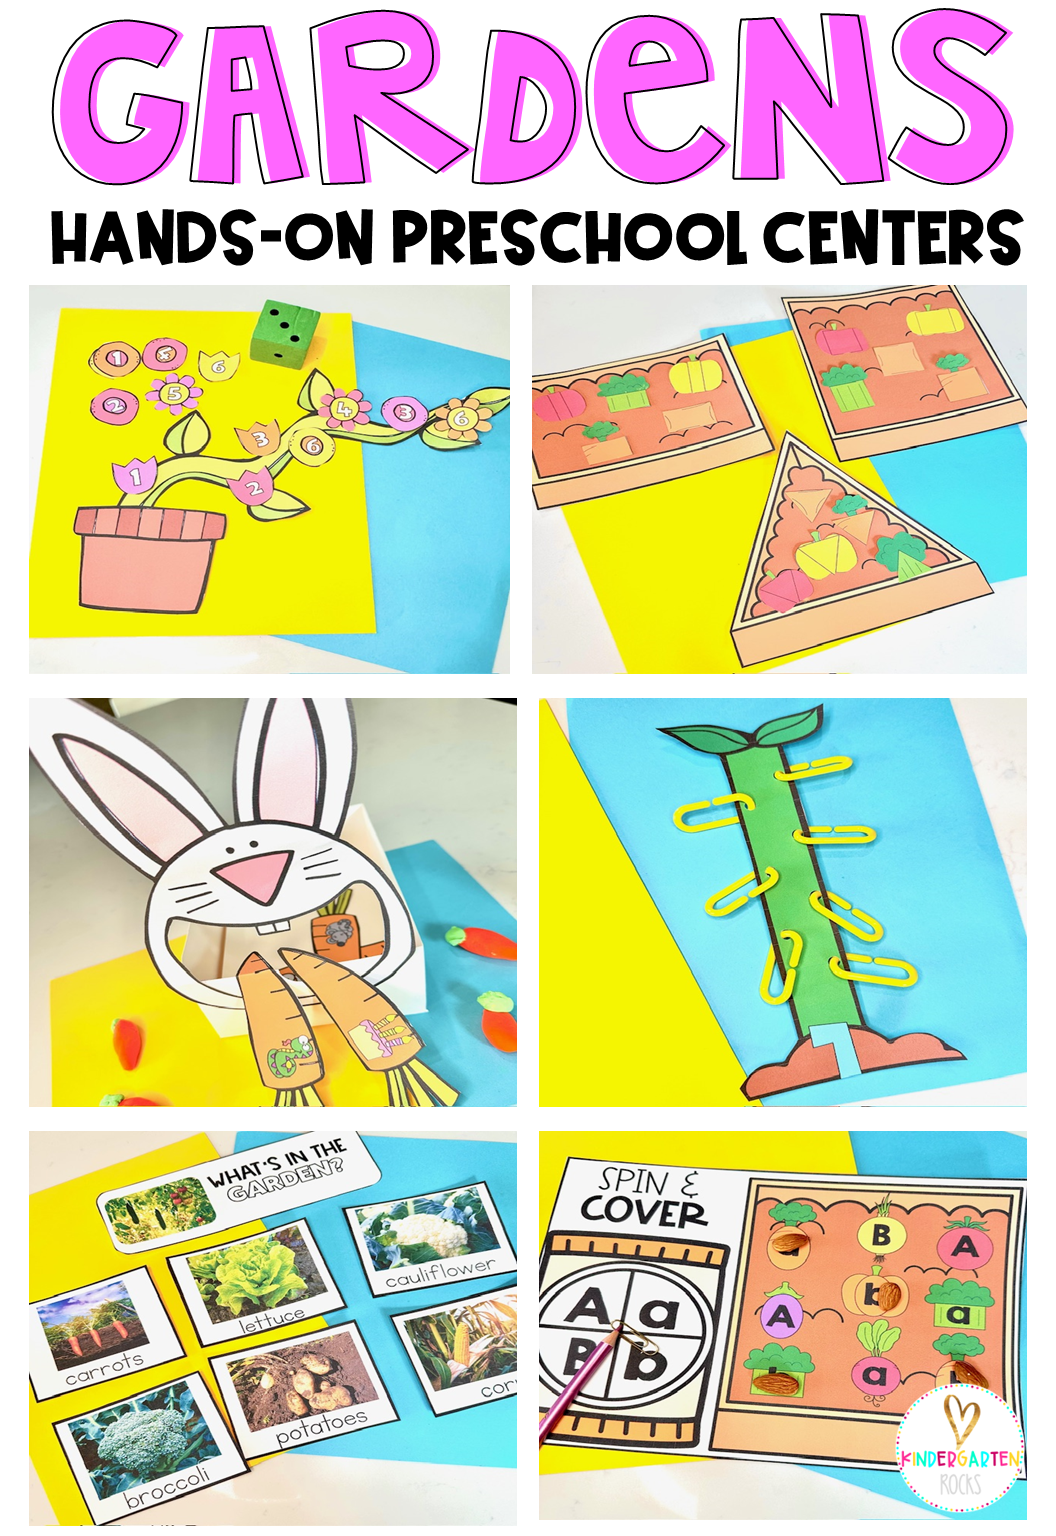 Are you looking for garden, flower and plants math and literacy centers and activities for your preschool classroom spring centers? Then you will love our Gardens, Flowers and Plants Centers and Morning Bins for the spring months of pre-k.